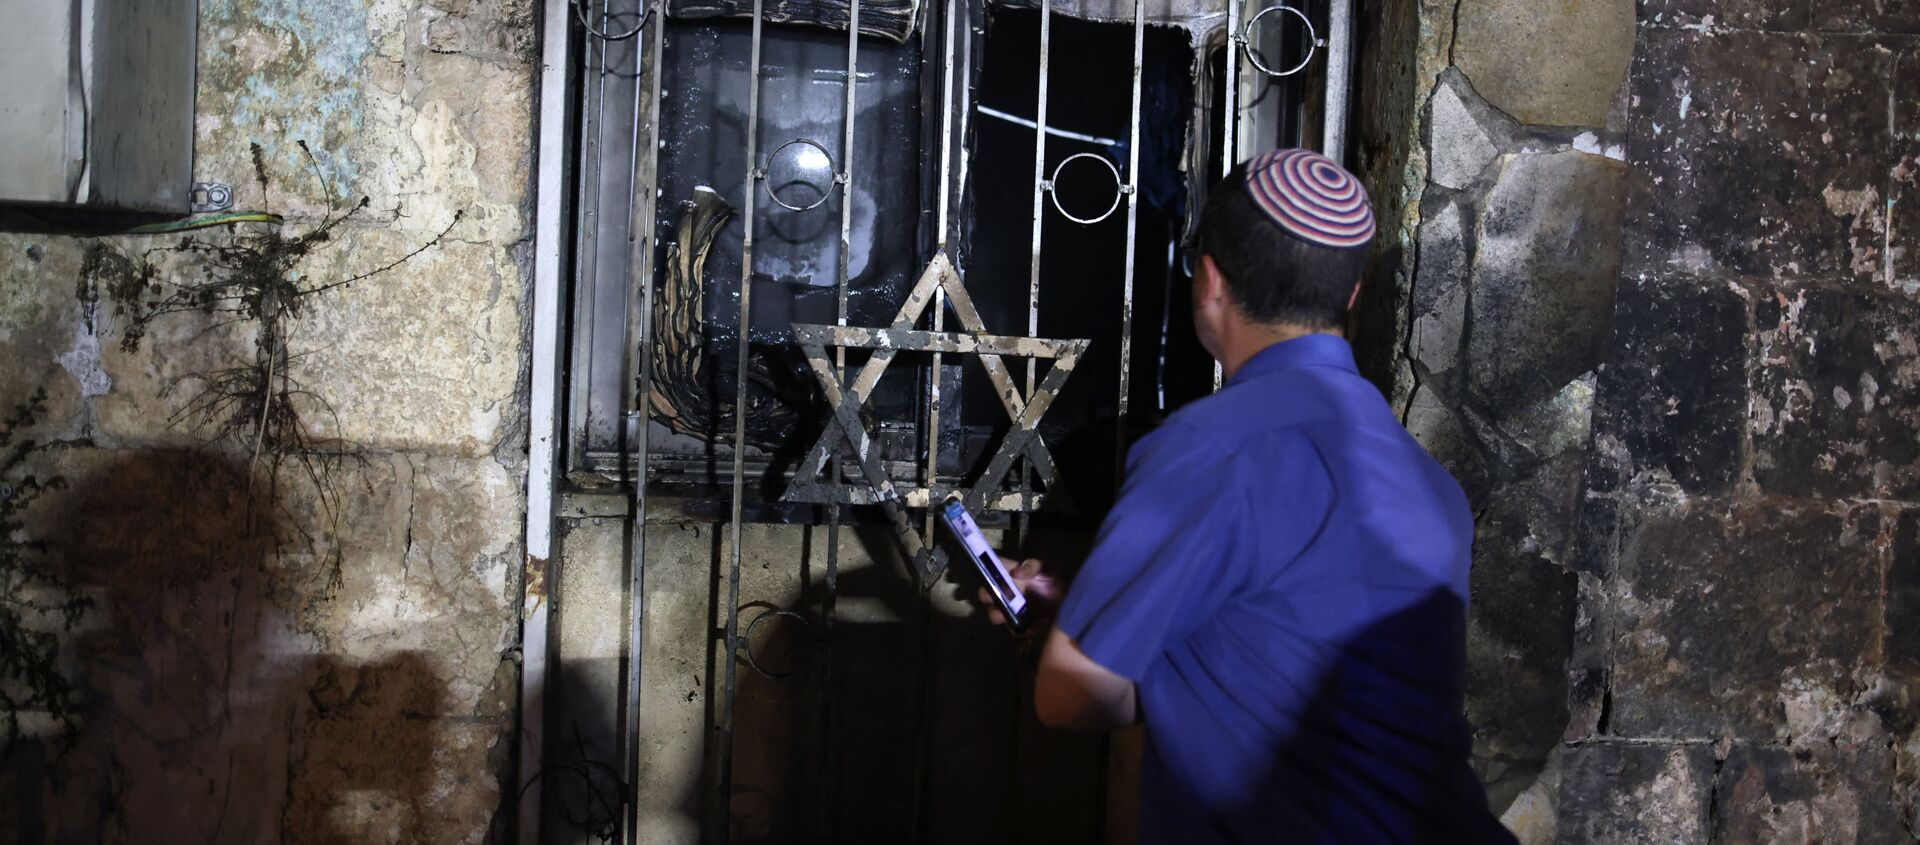 An Israeli man looks inside a synagogue, after it was set on fire by Arab-Israelis, in the mixed Jewish-Arab city of Lod on May 14, 2021, during clashes between Israeli far-right extremists and Arab-Israelis - Sputnik Afrique, 1920